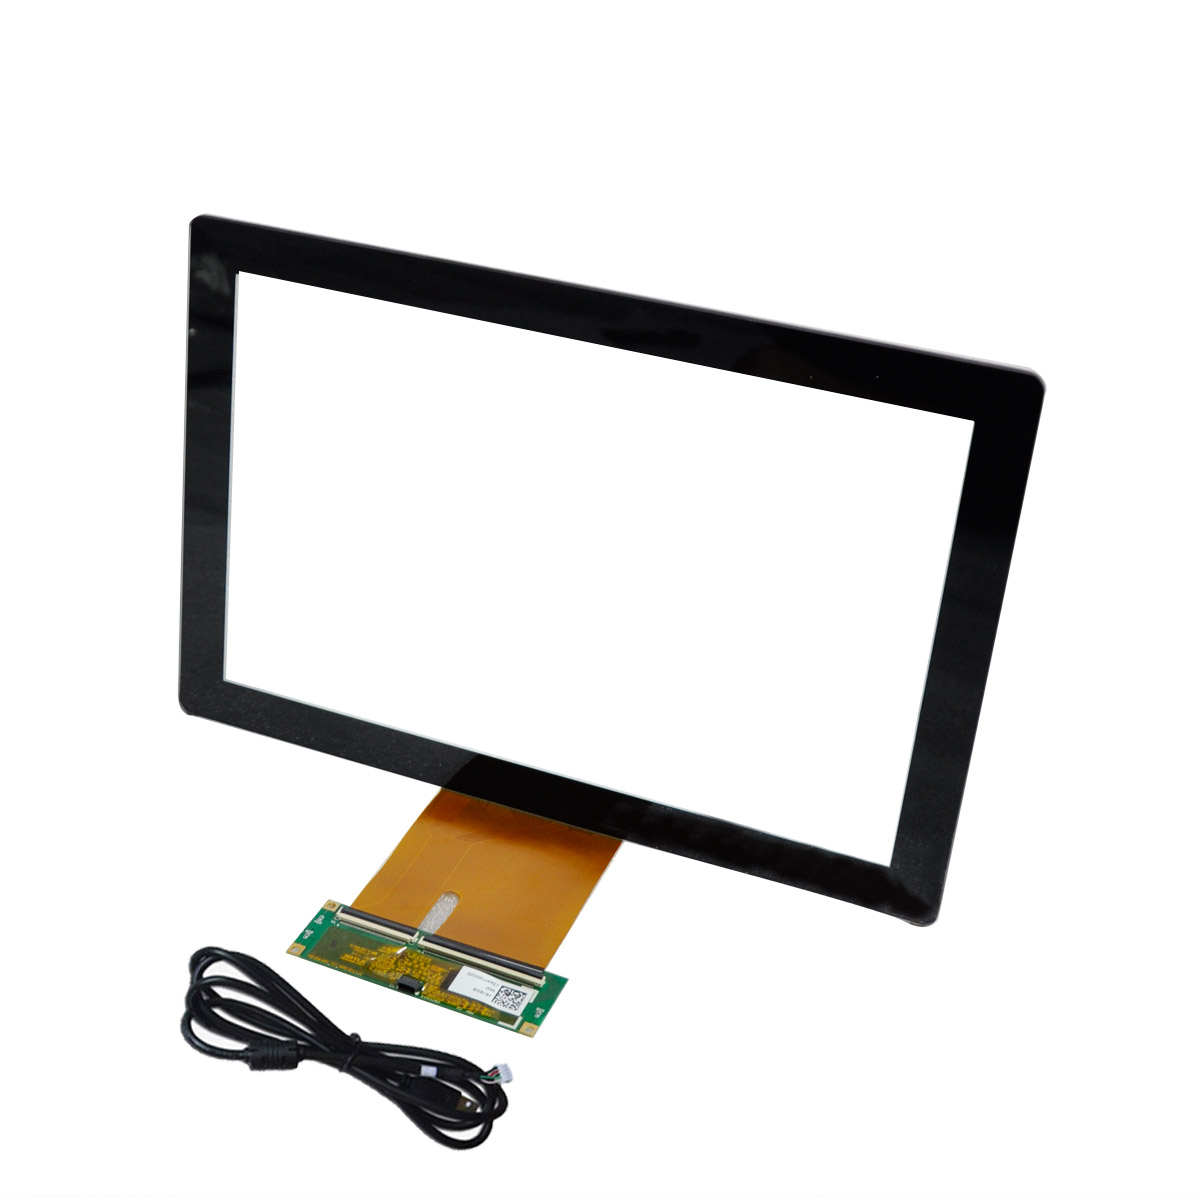 11.6 inch Projected Capacitive touch screens PCAP/PCT EETI/ilitek Controller